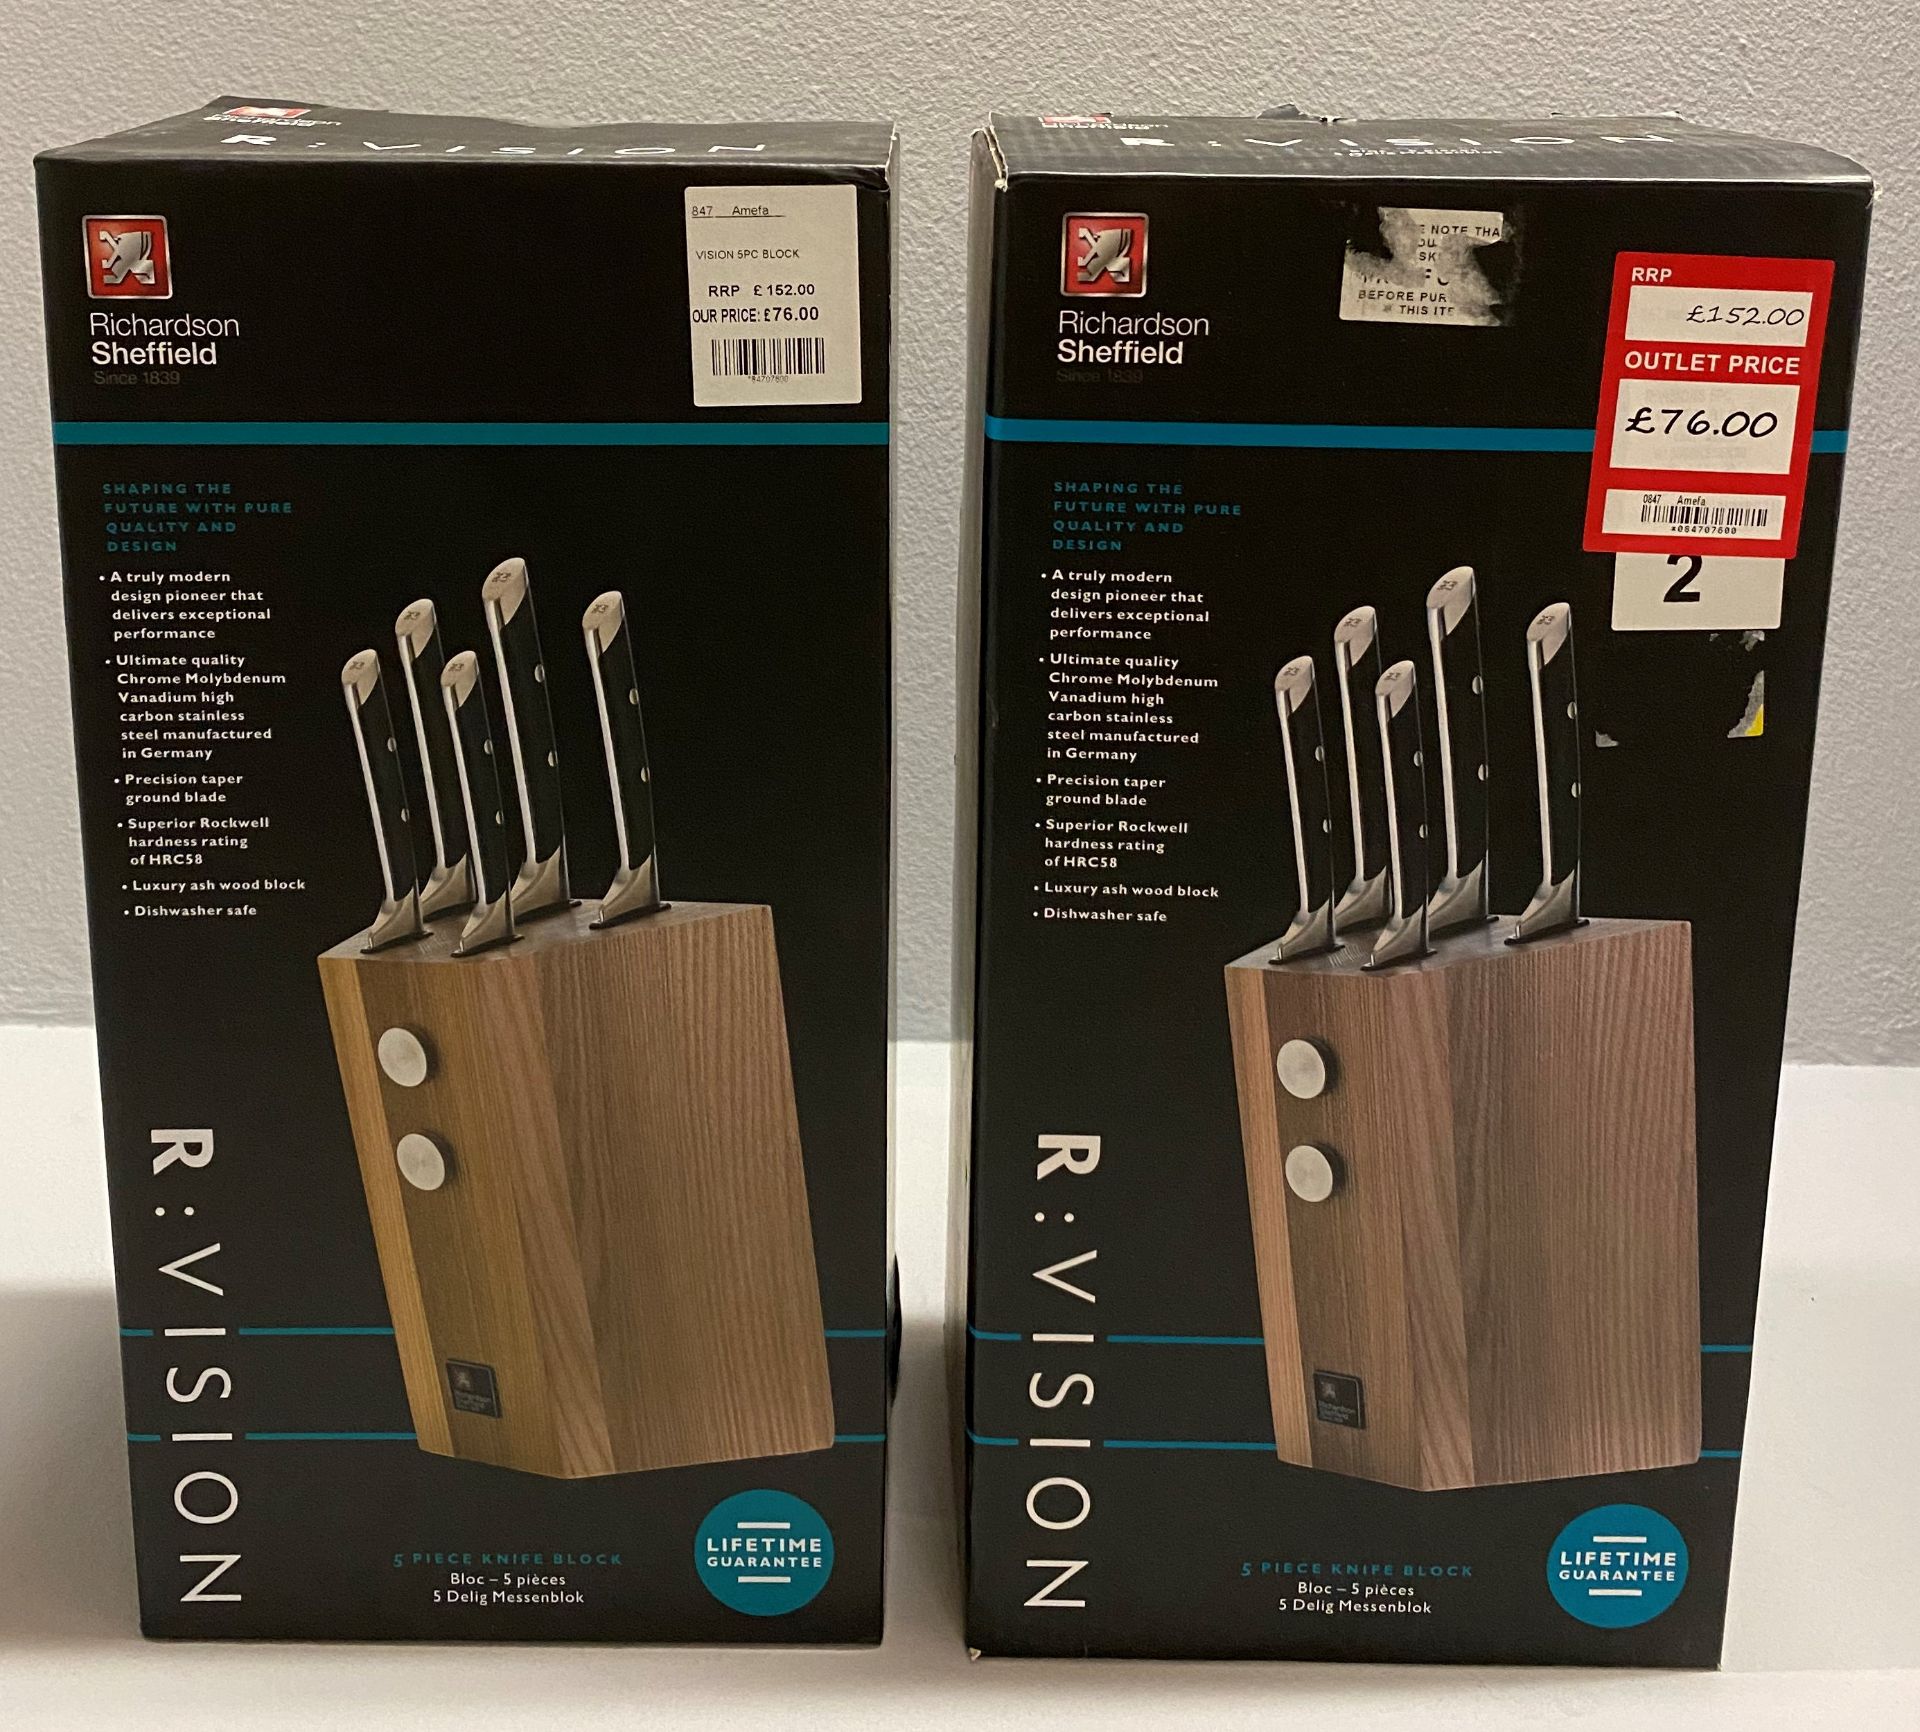 2 x Richardson Sheffield R:VISION 5 piece stainless steel knife block sets RRP £152.